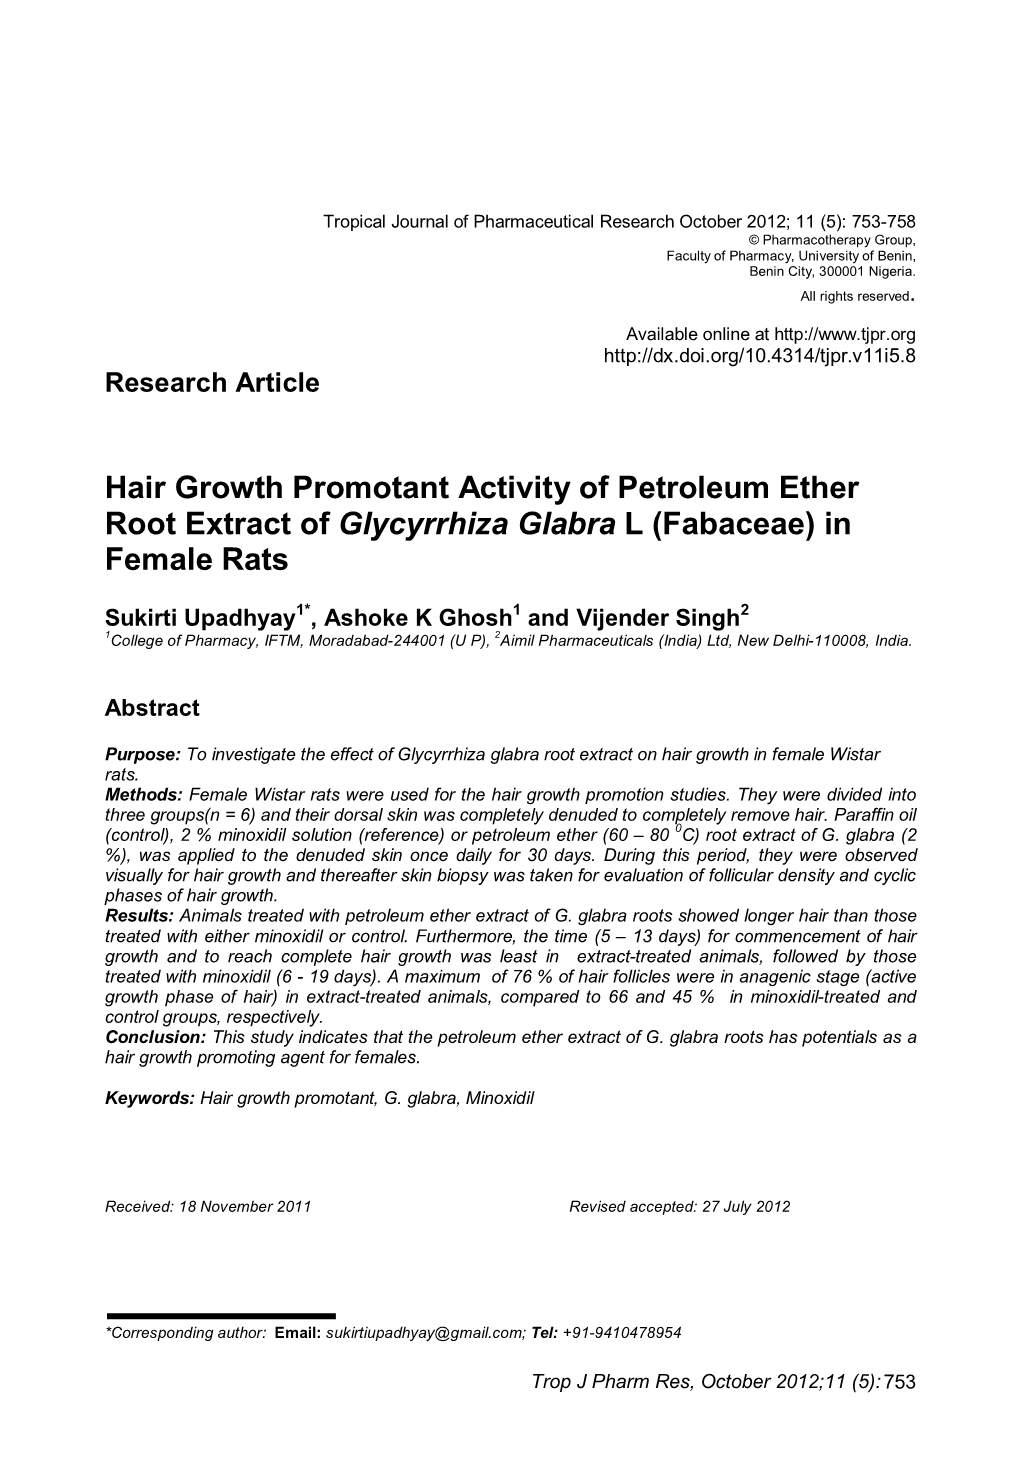 Hair Growth Promotant Activity of Petroleum Ether Root Extract of Glycyrrhiza Glabra L (Fabaceae) in Female Rats